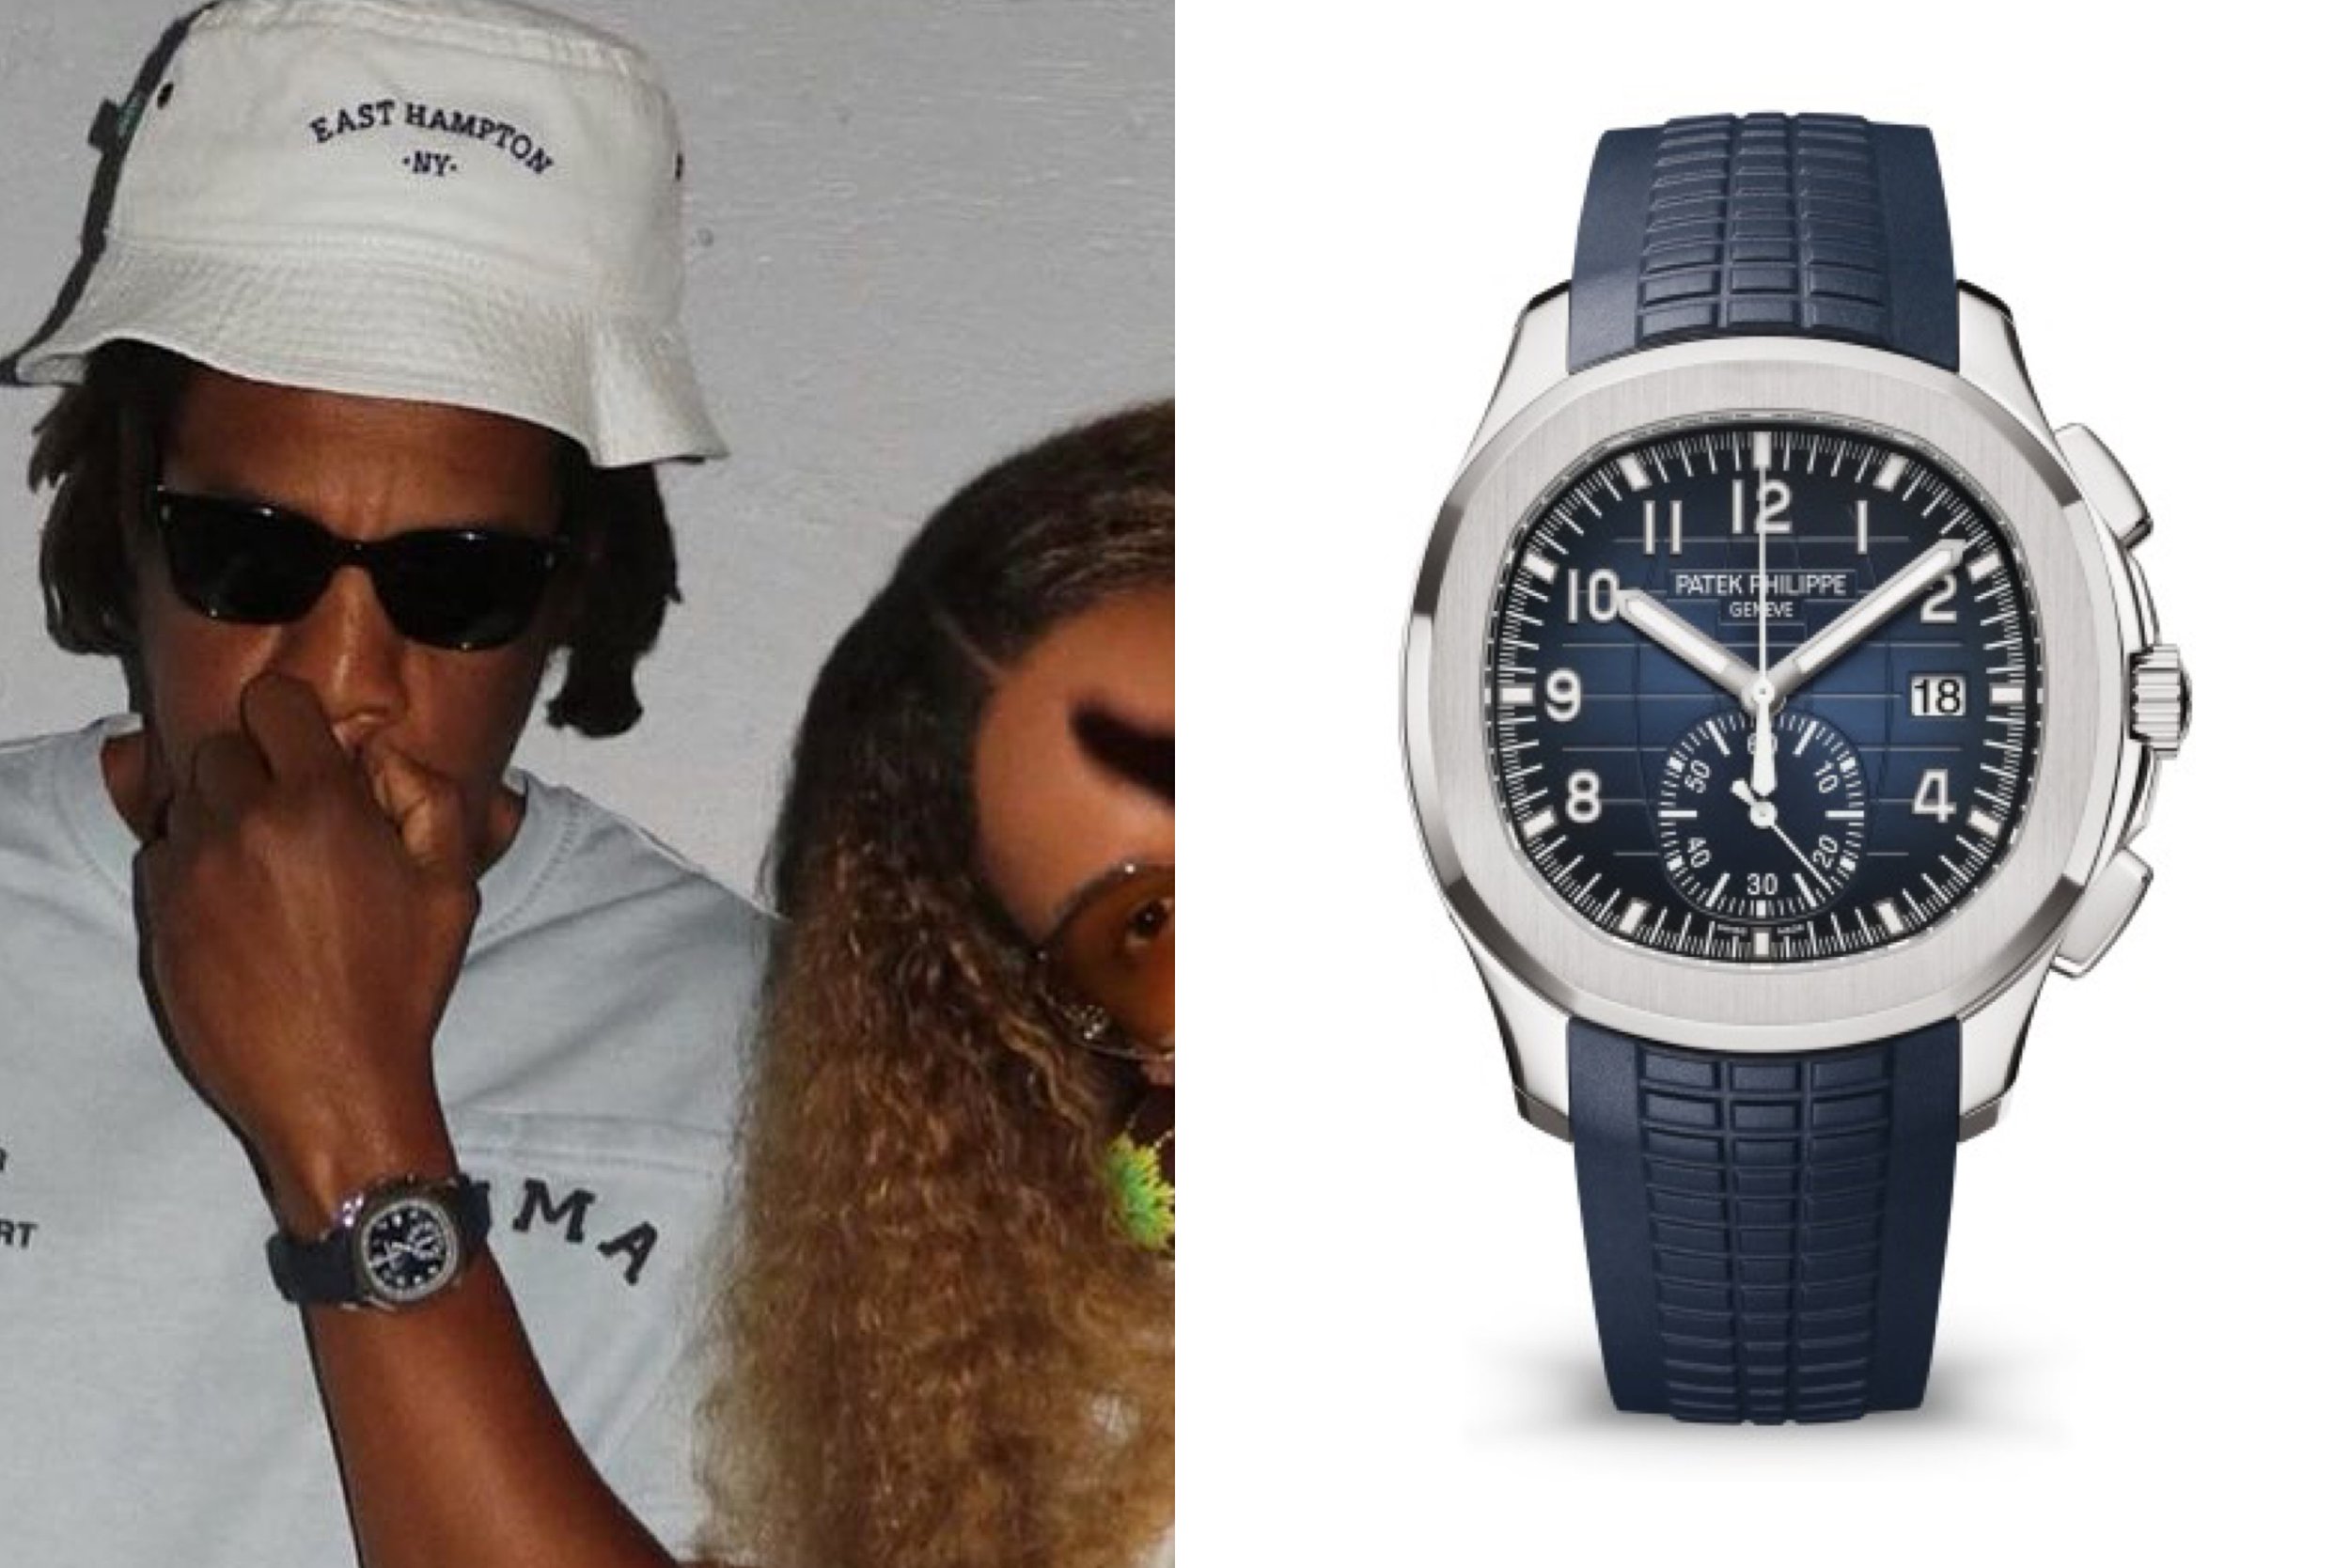 Jay-Z's Patek Philippe Watches - From his Tiffany Blue Nautilus 5711 to his  Grandmaster Chime — Wrist Enthusiast